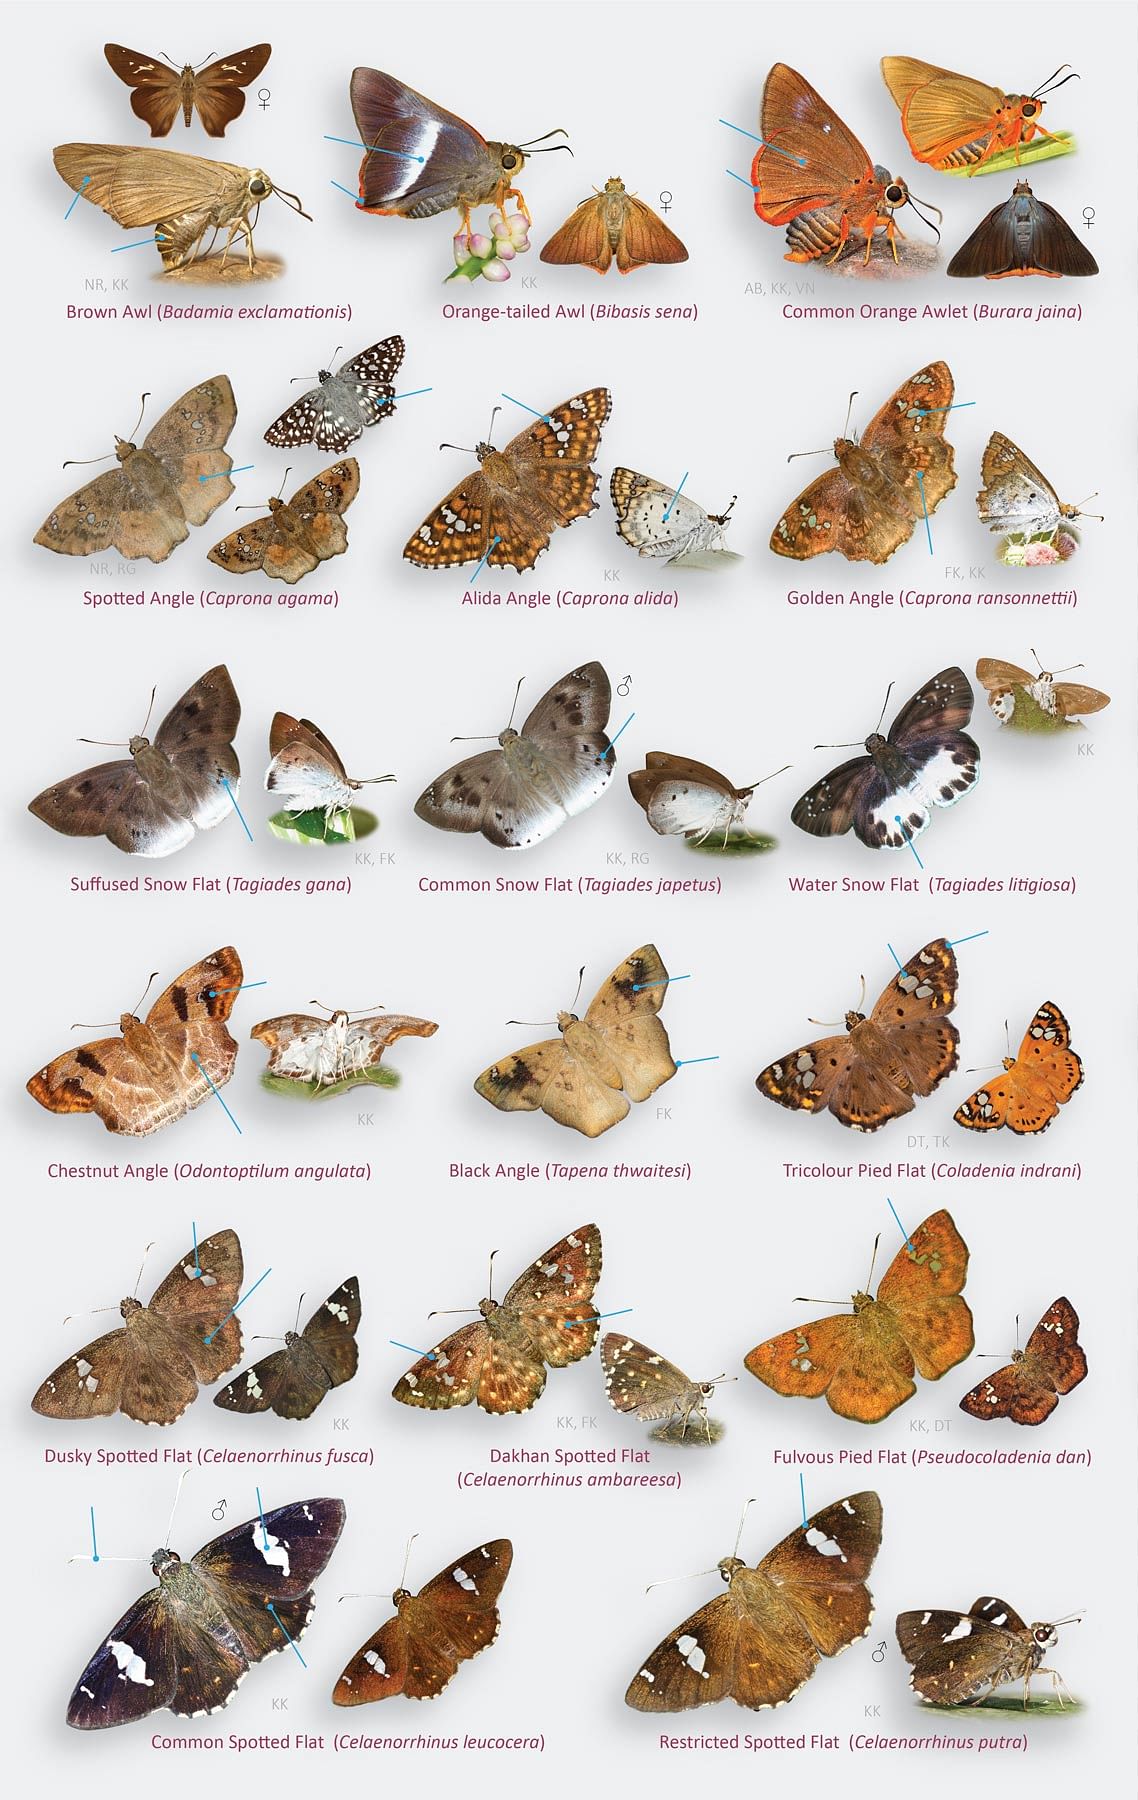 Butterfly species documented in the brochure.